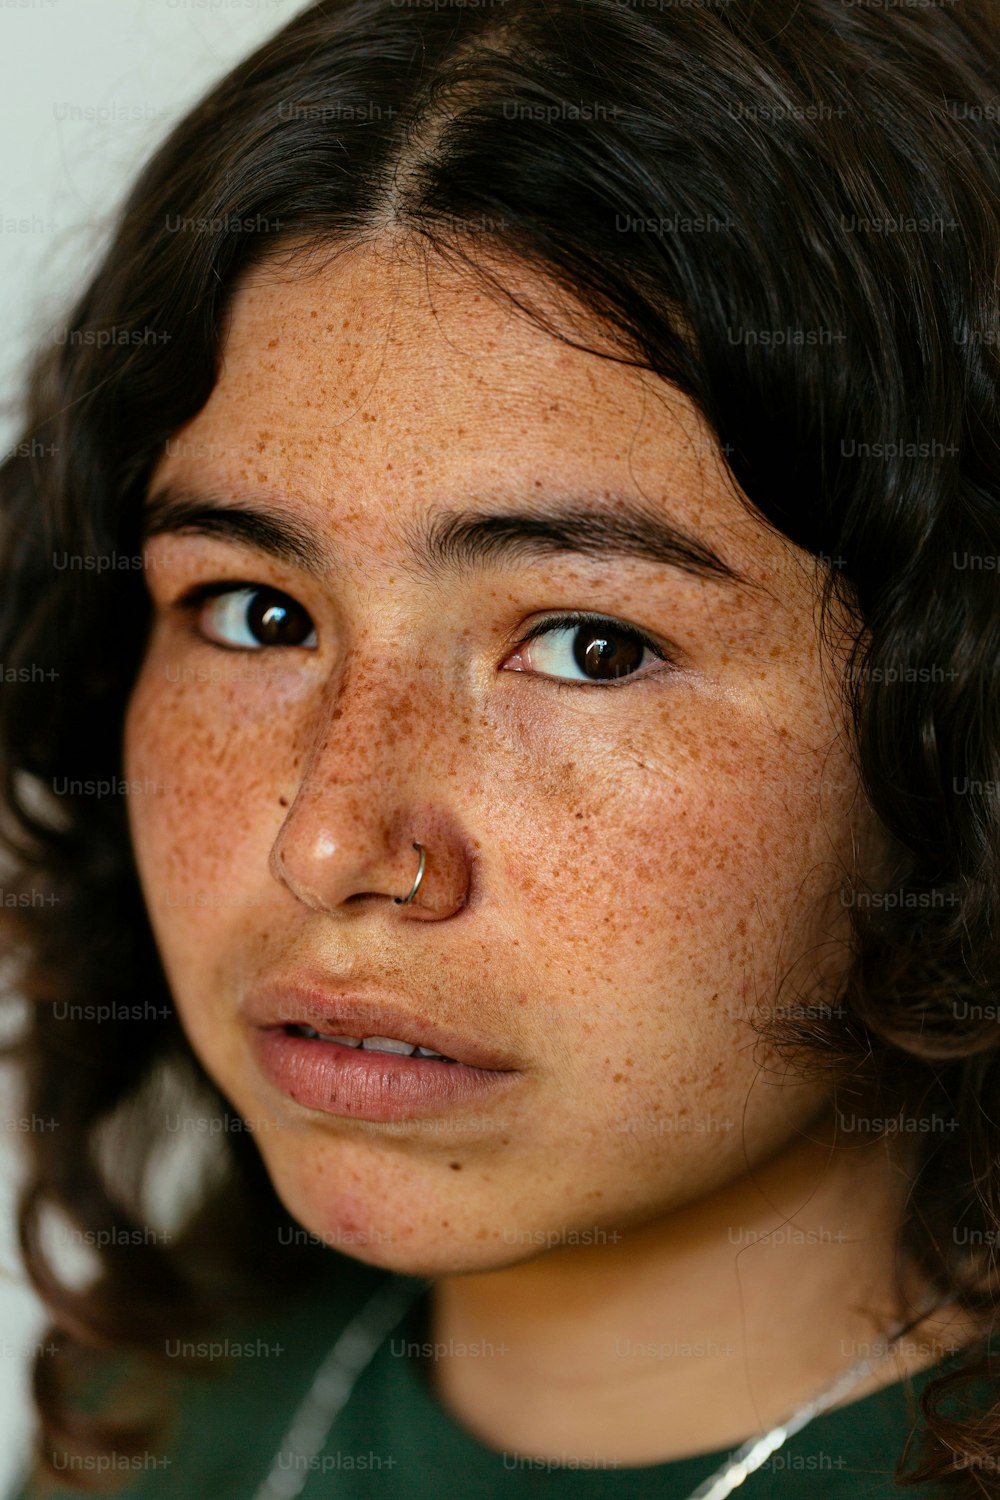 a close up of a person with freckles on her face